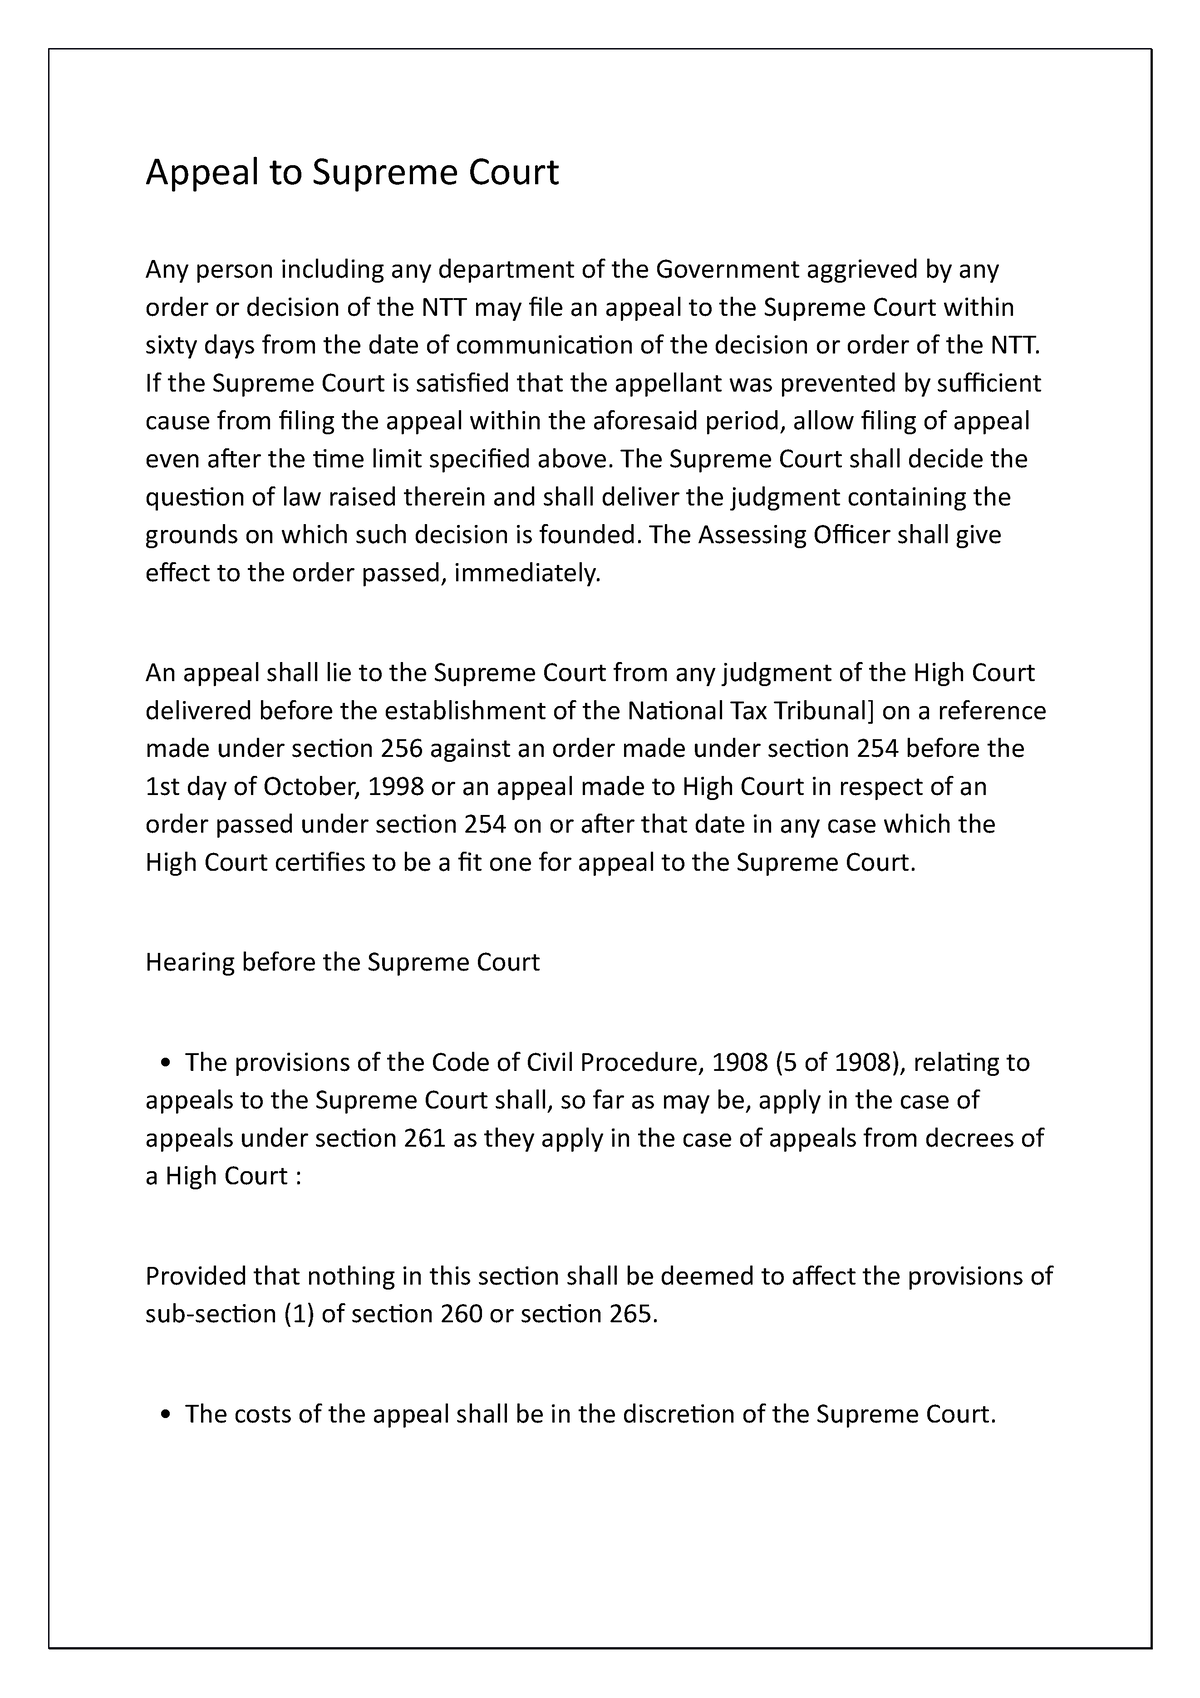 Appeal to Supreme Court If the Supreme Court is satisfied that the